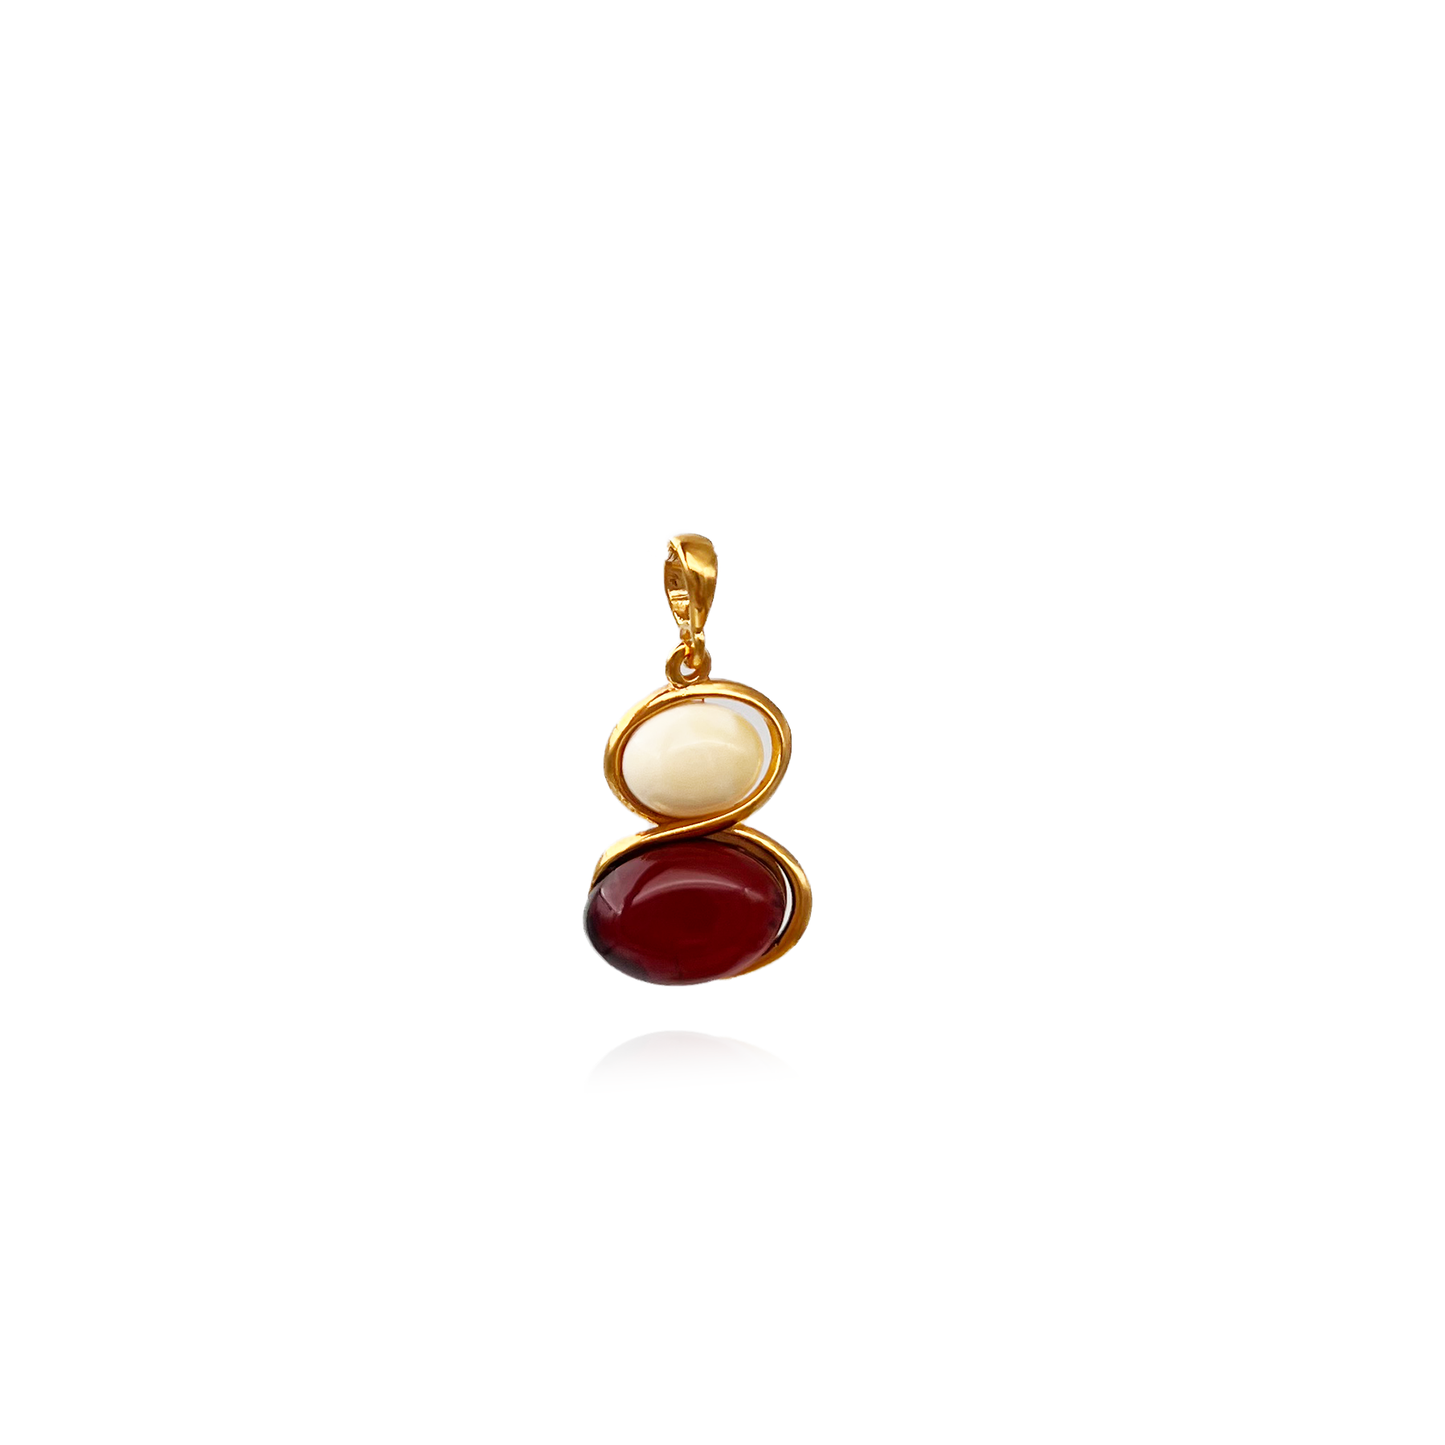 Amber pendant in gold-plated silver 925 "Jin Jan"